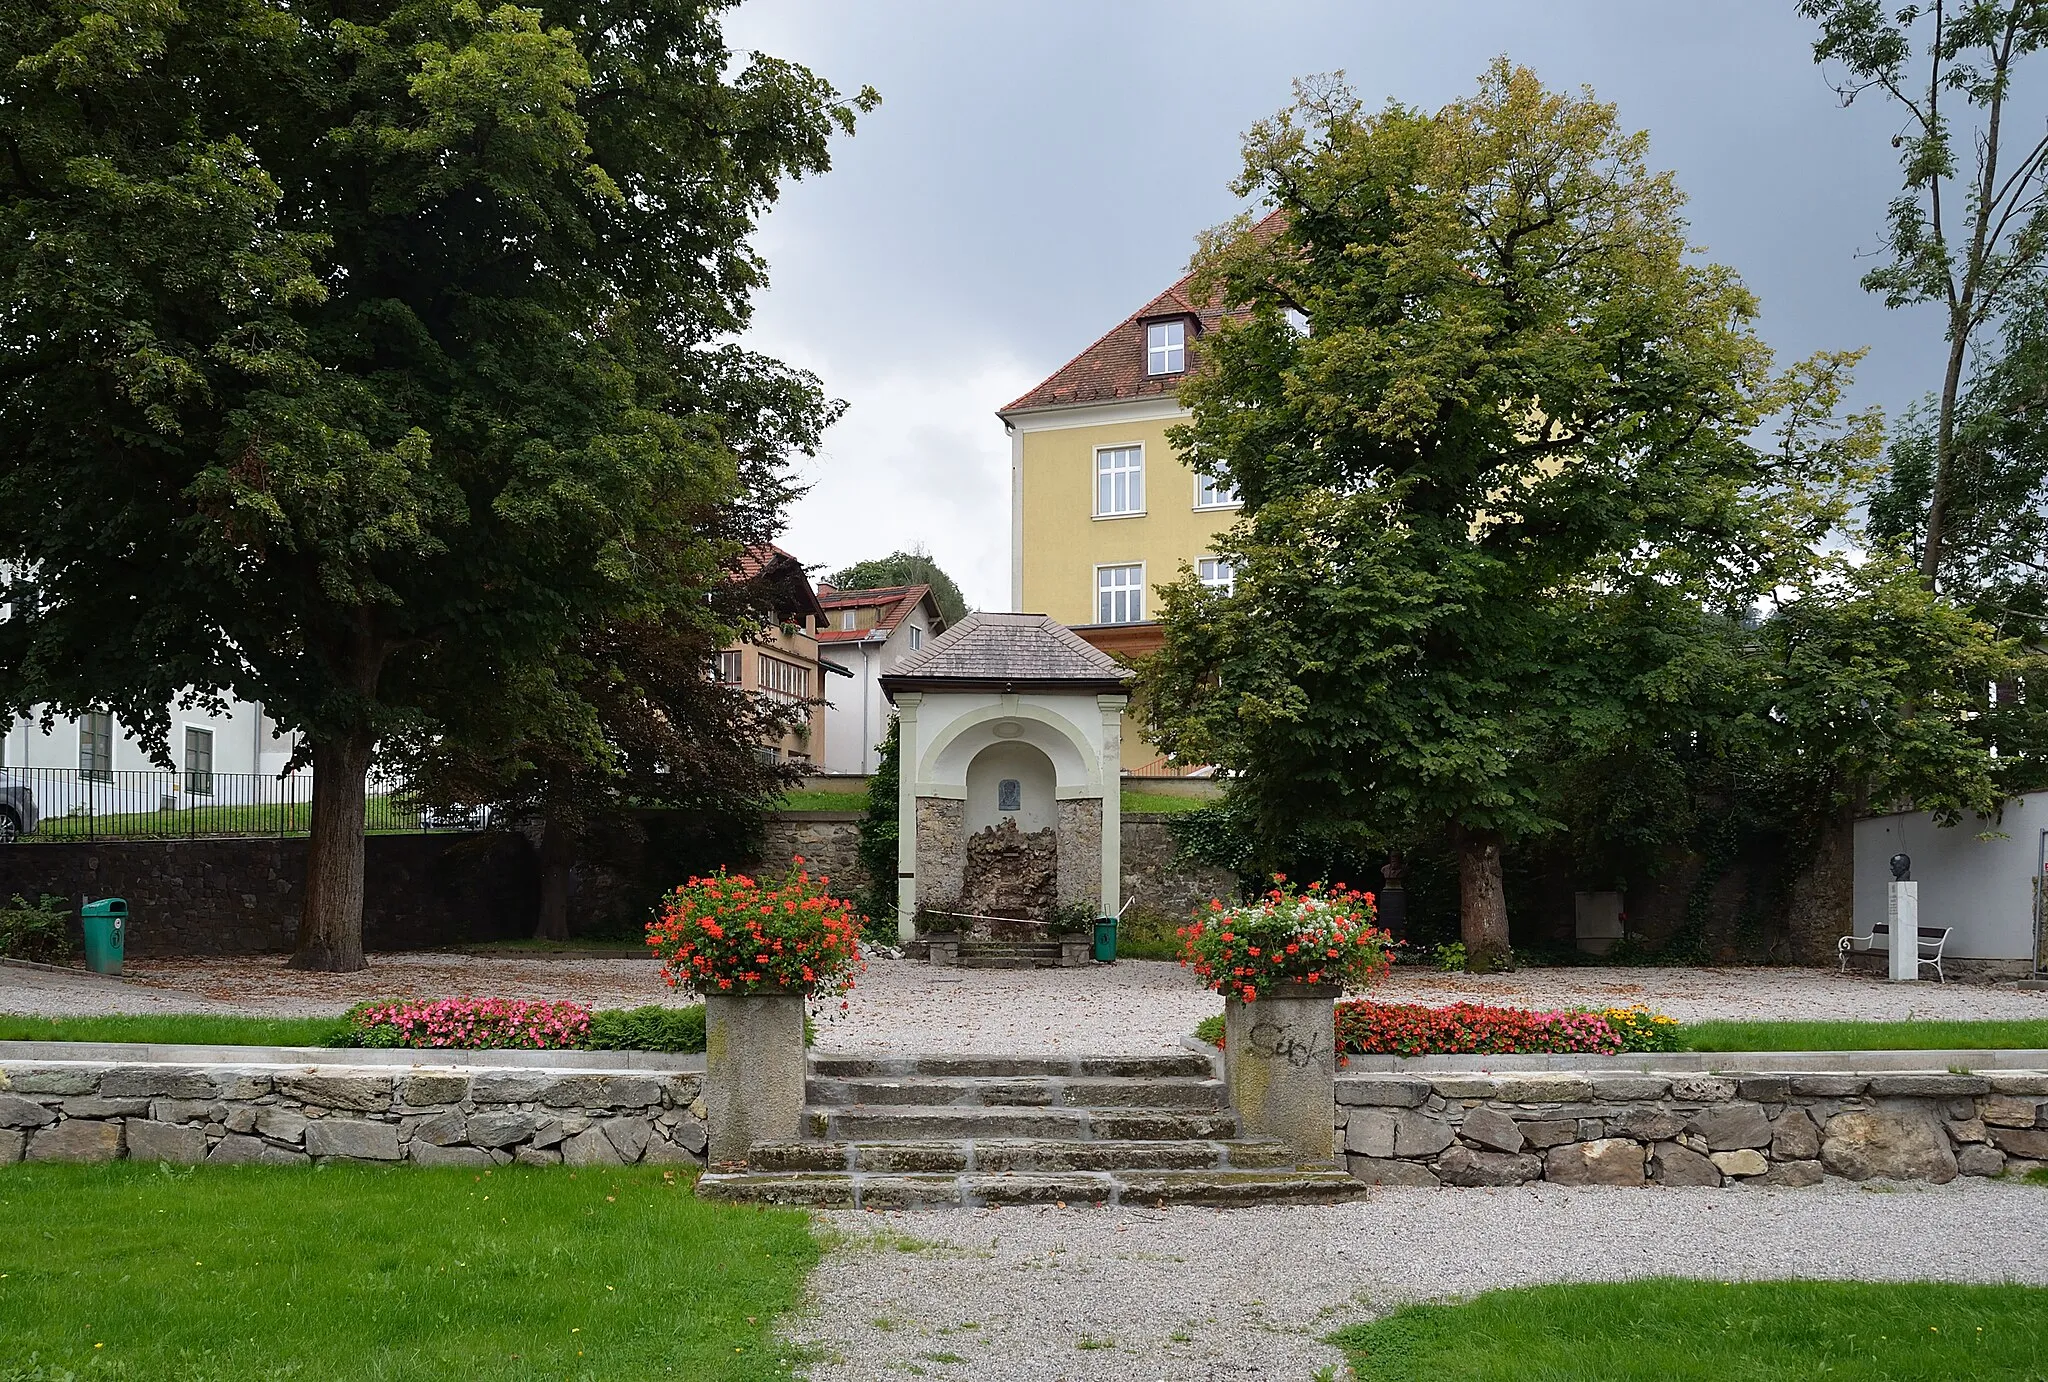 Photo showing: Dietrichpark, a public park at Mürzzuschlag